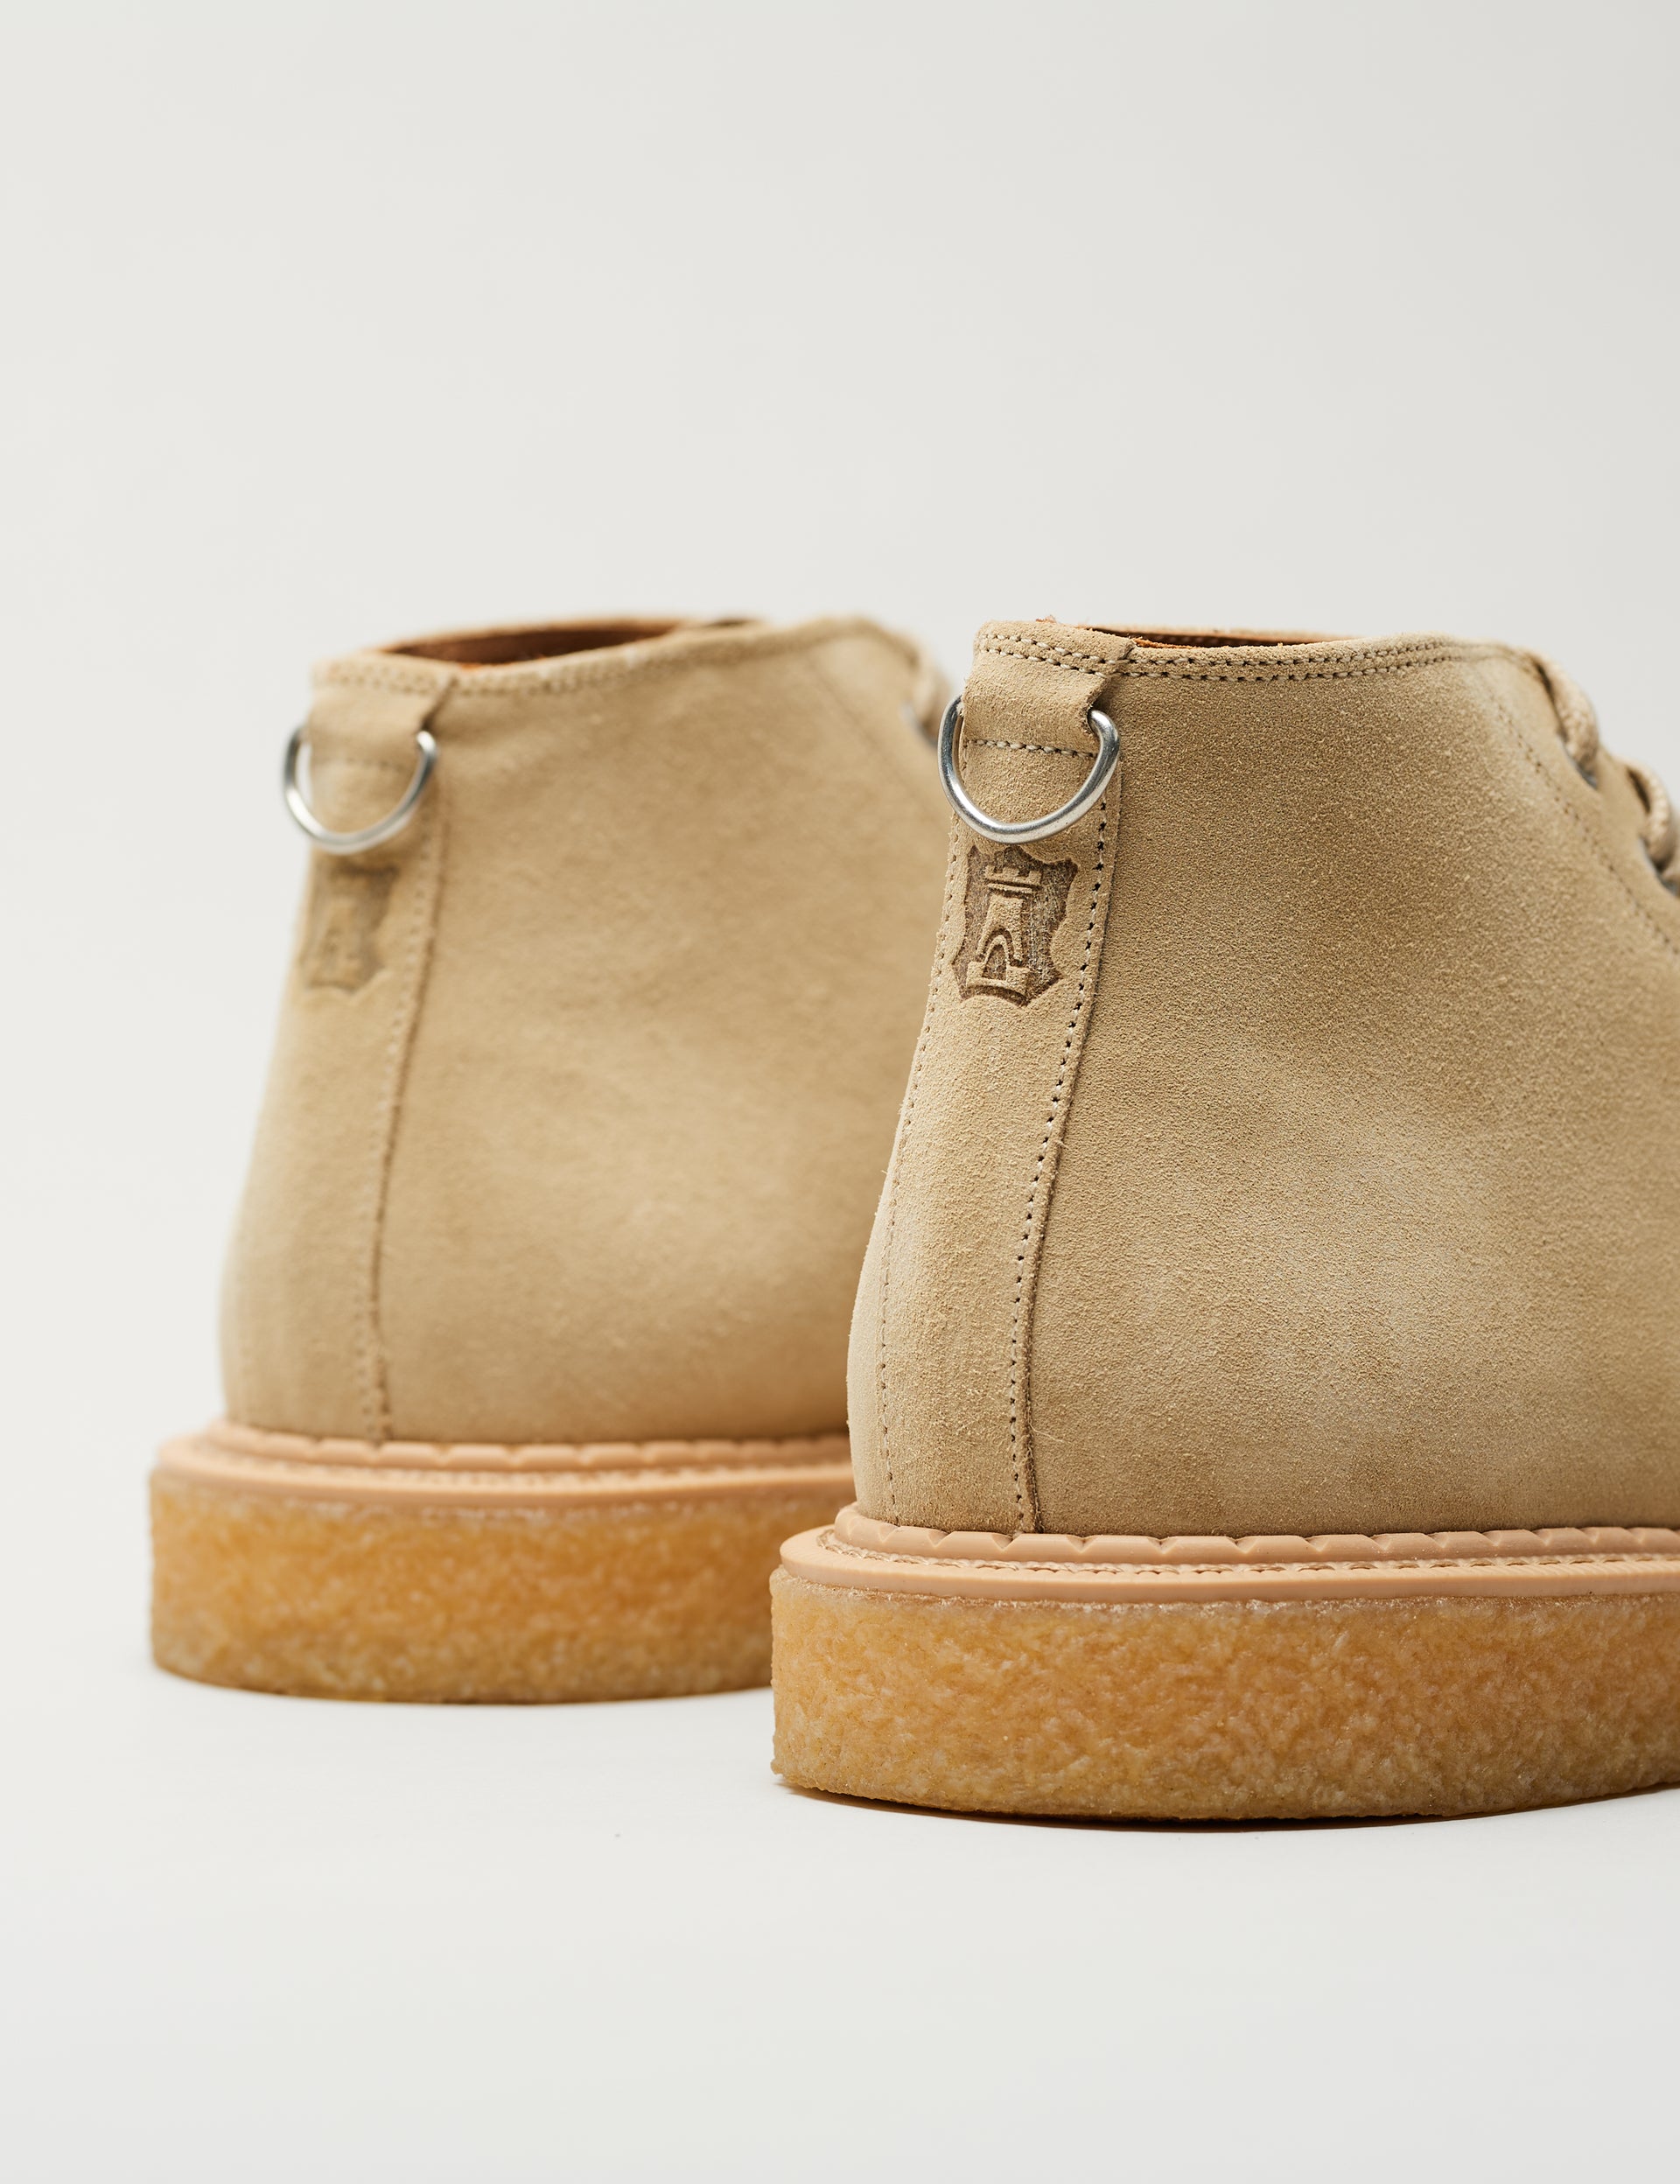 Monkey Boot Sand Suede